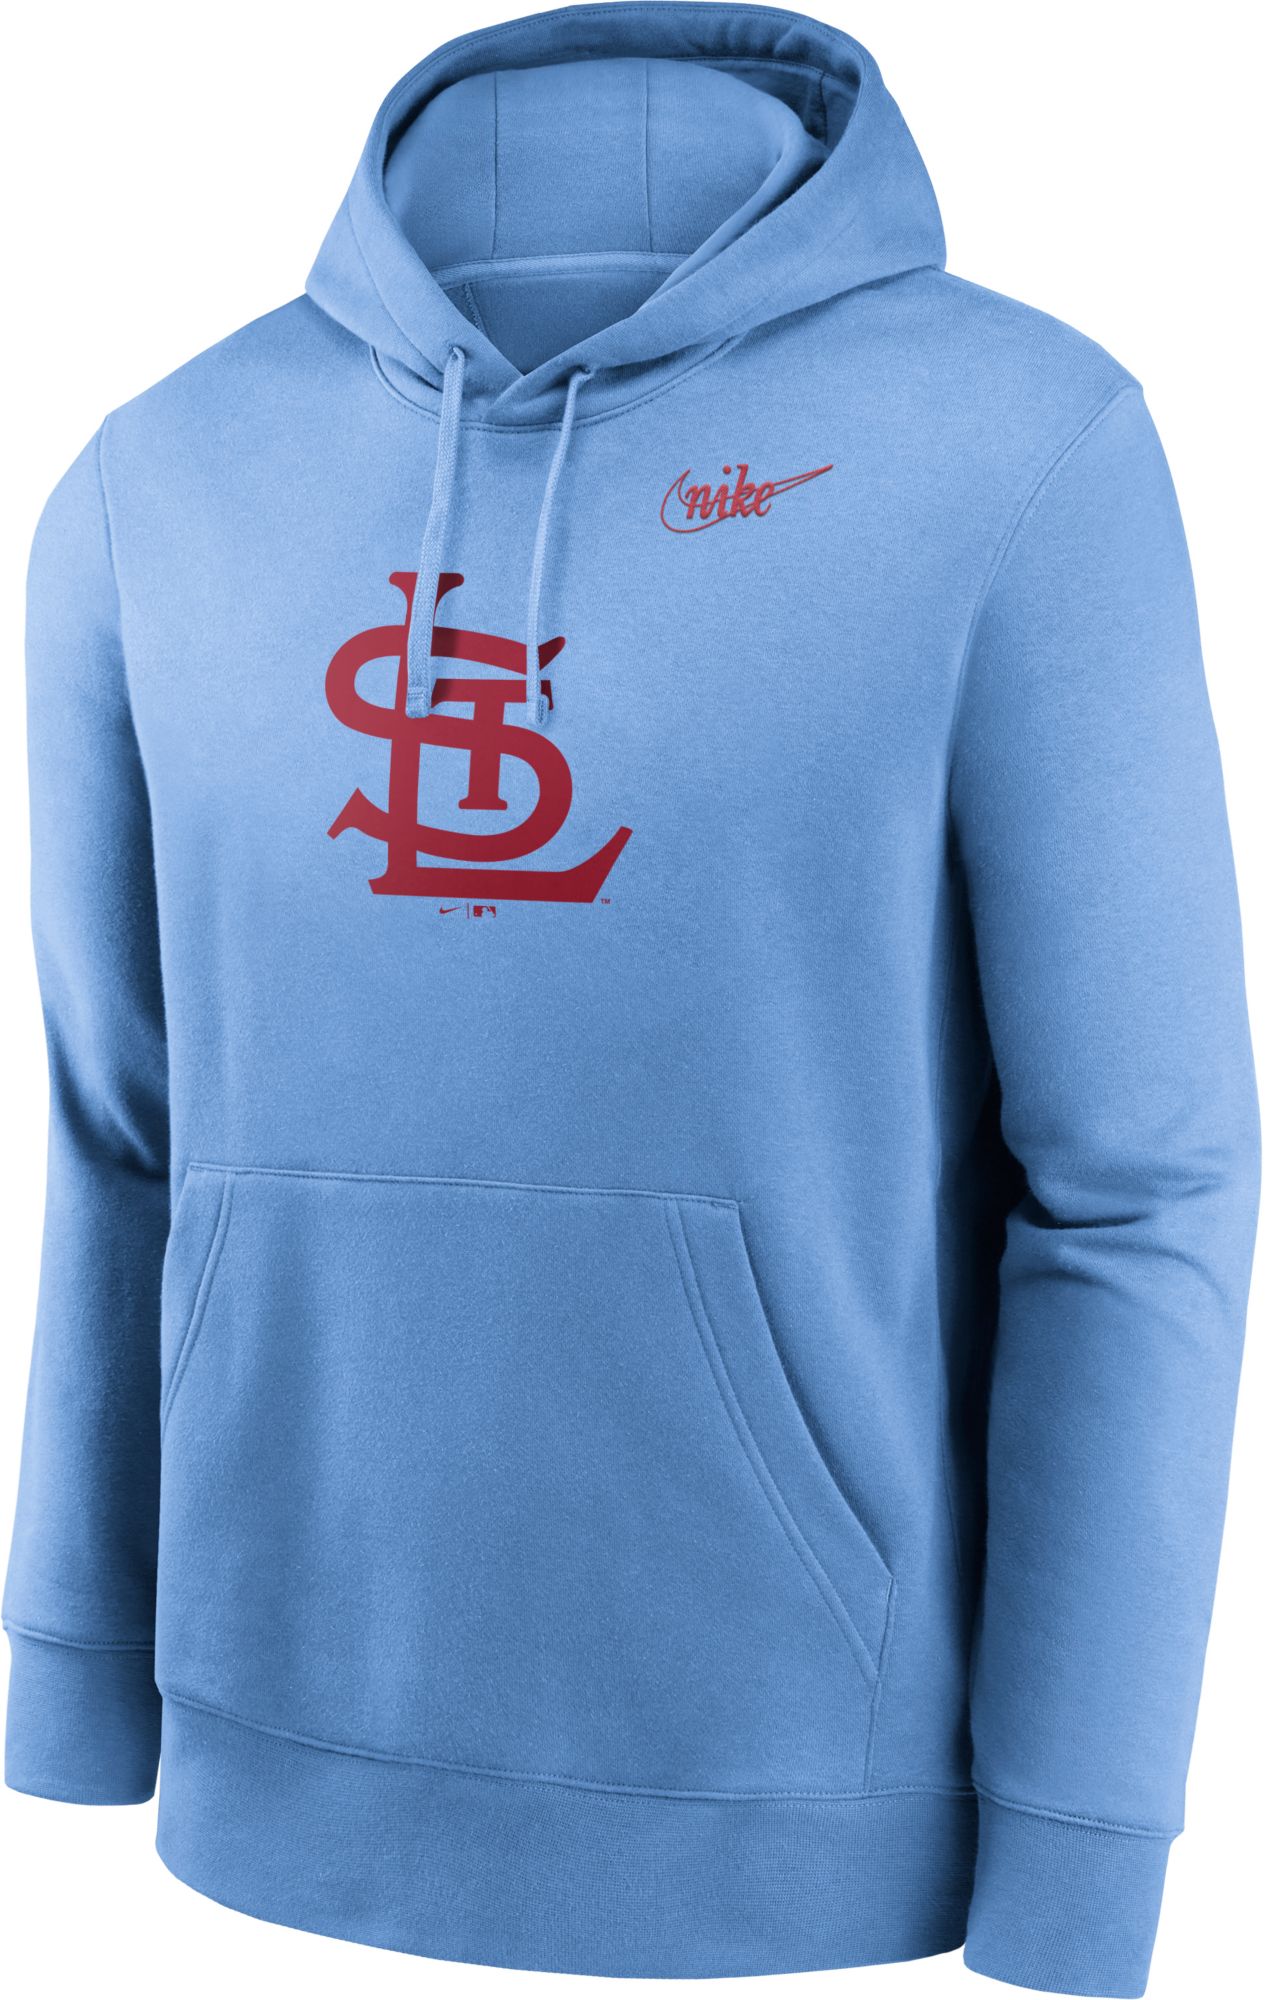 Men's Washington Nationals Nike Red Team Lettering Club Pullover Hoodie